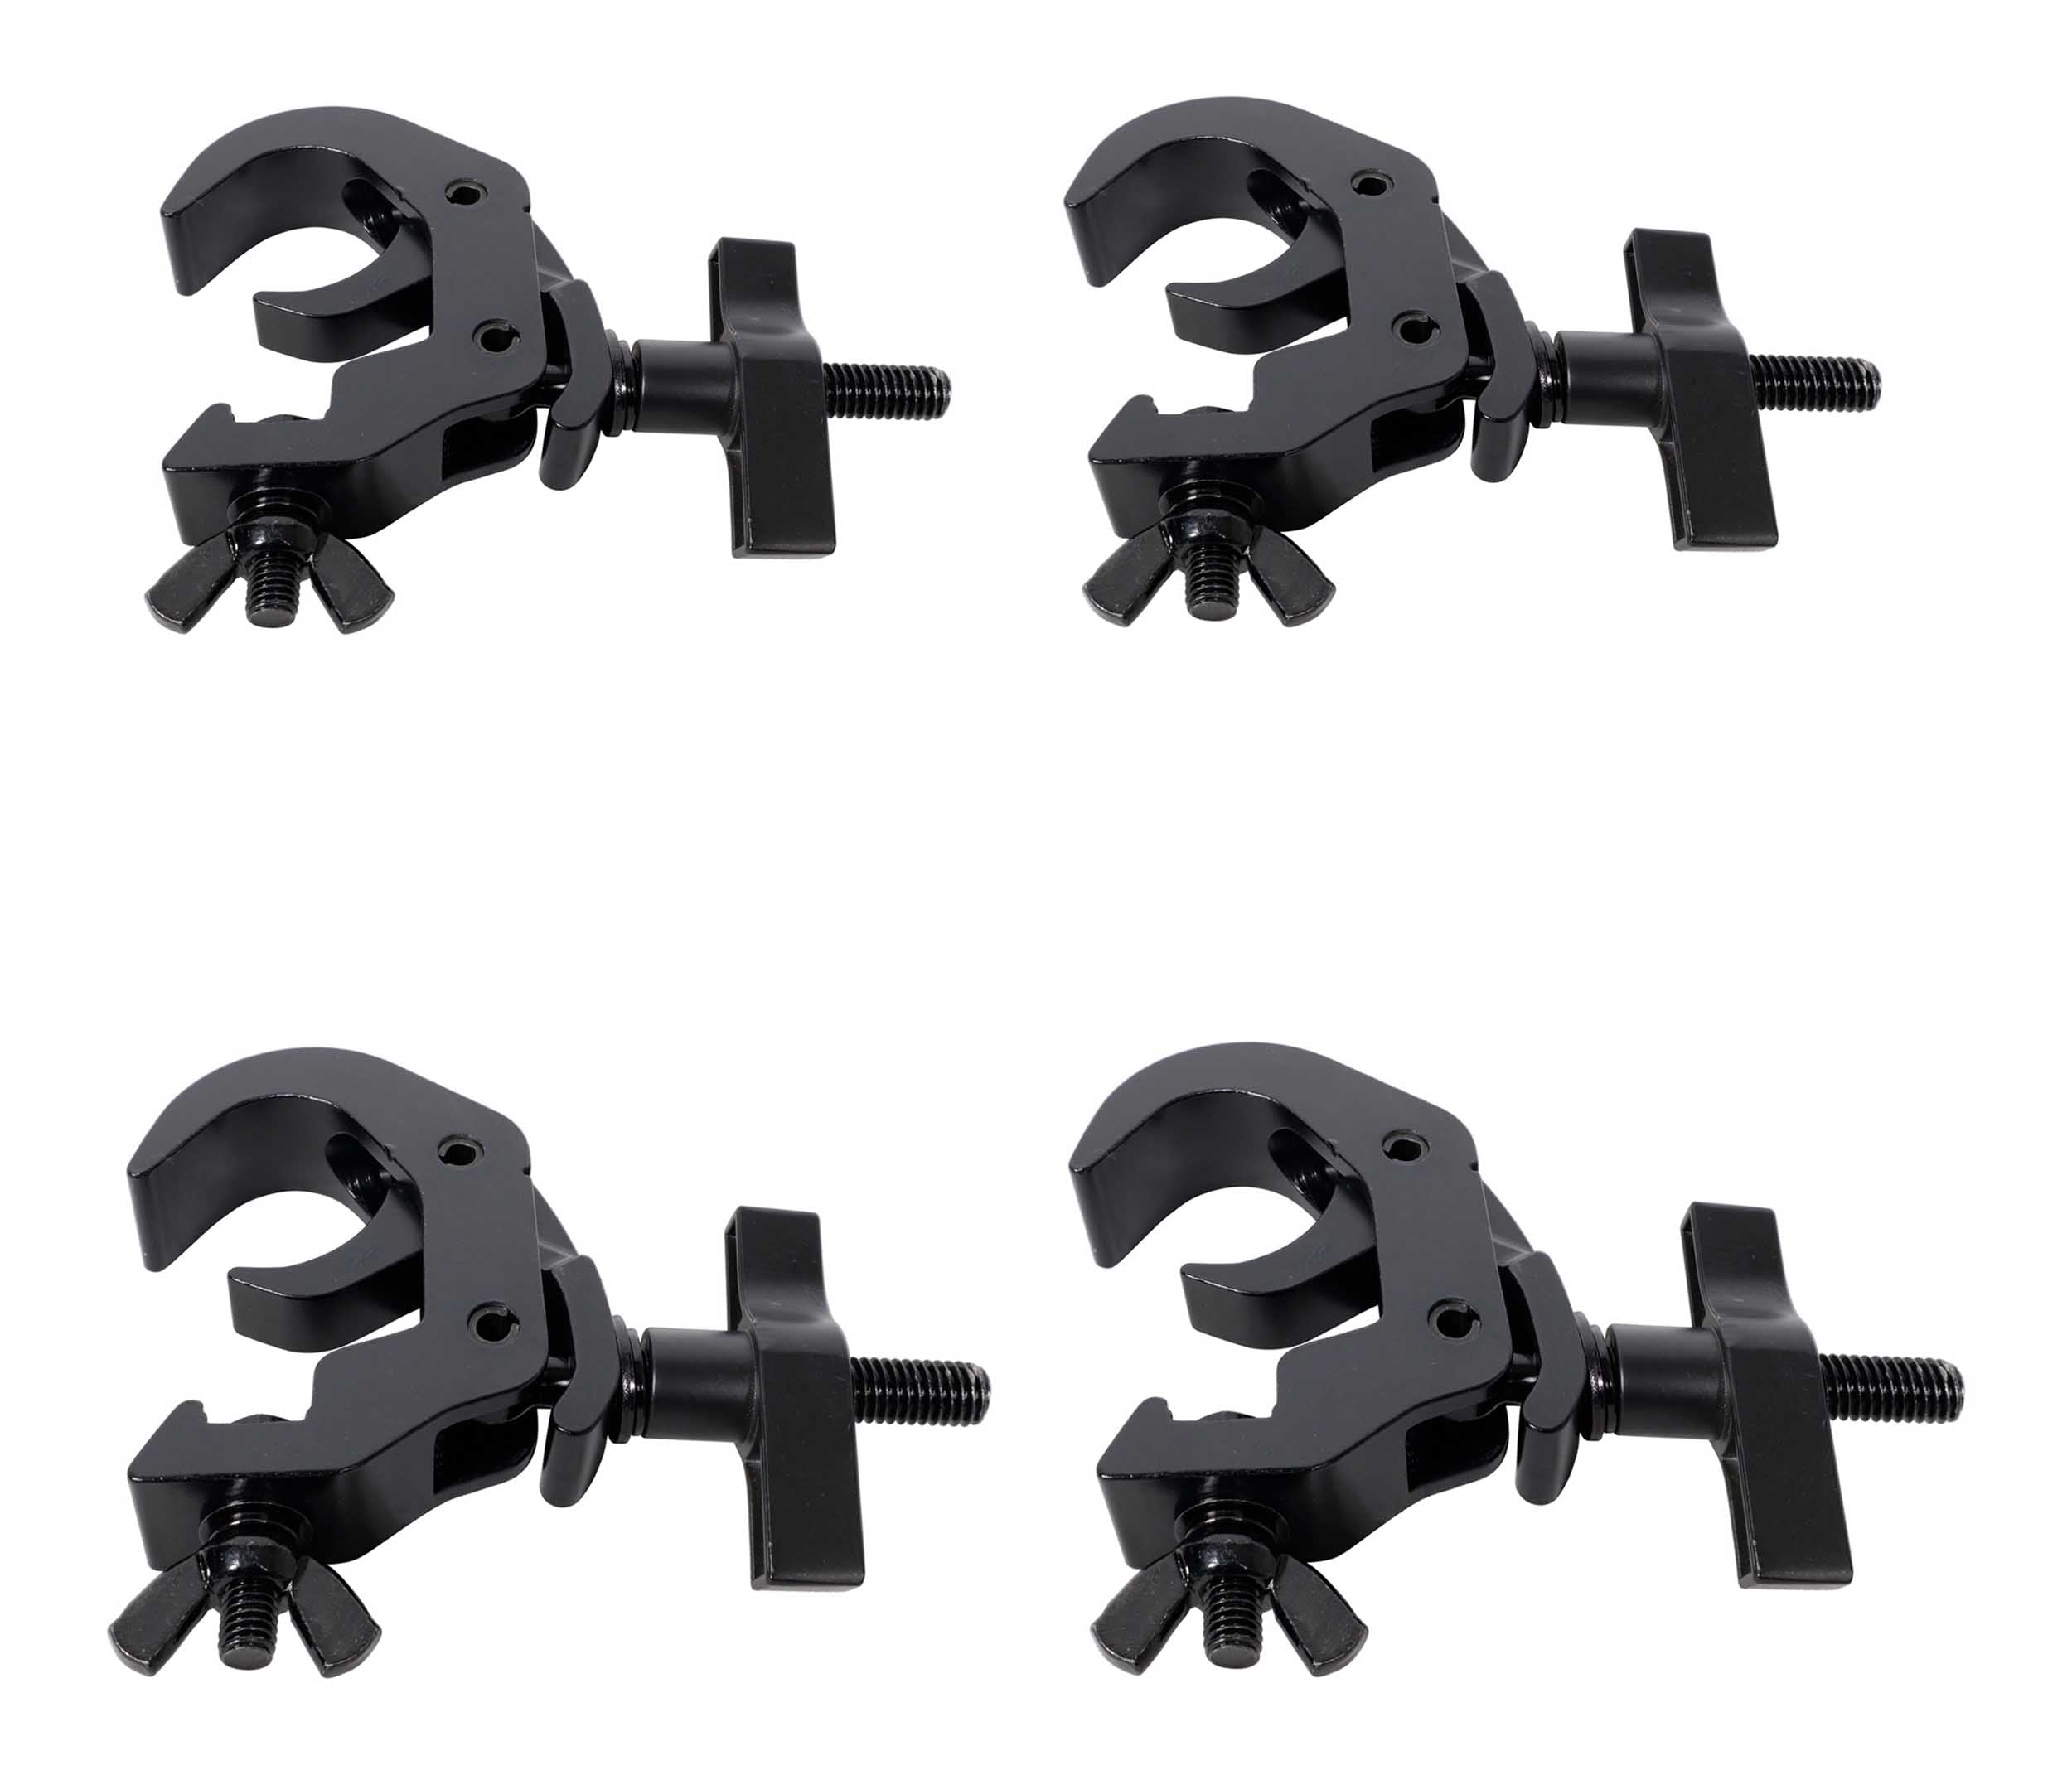 ProX T-C12H-BLKX4, Set of 4 Aluminum Self-Locking M10 Clamp with Big Wing Knob for 2" Truss Tube Capacity 330 lbs - Black - Hollywood DJ